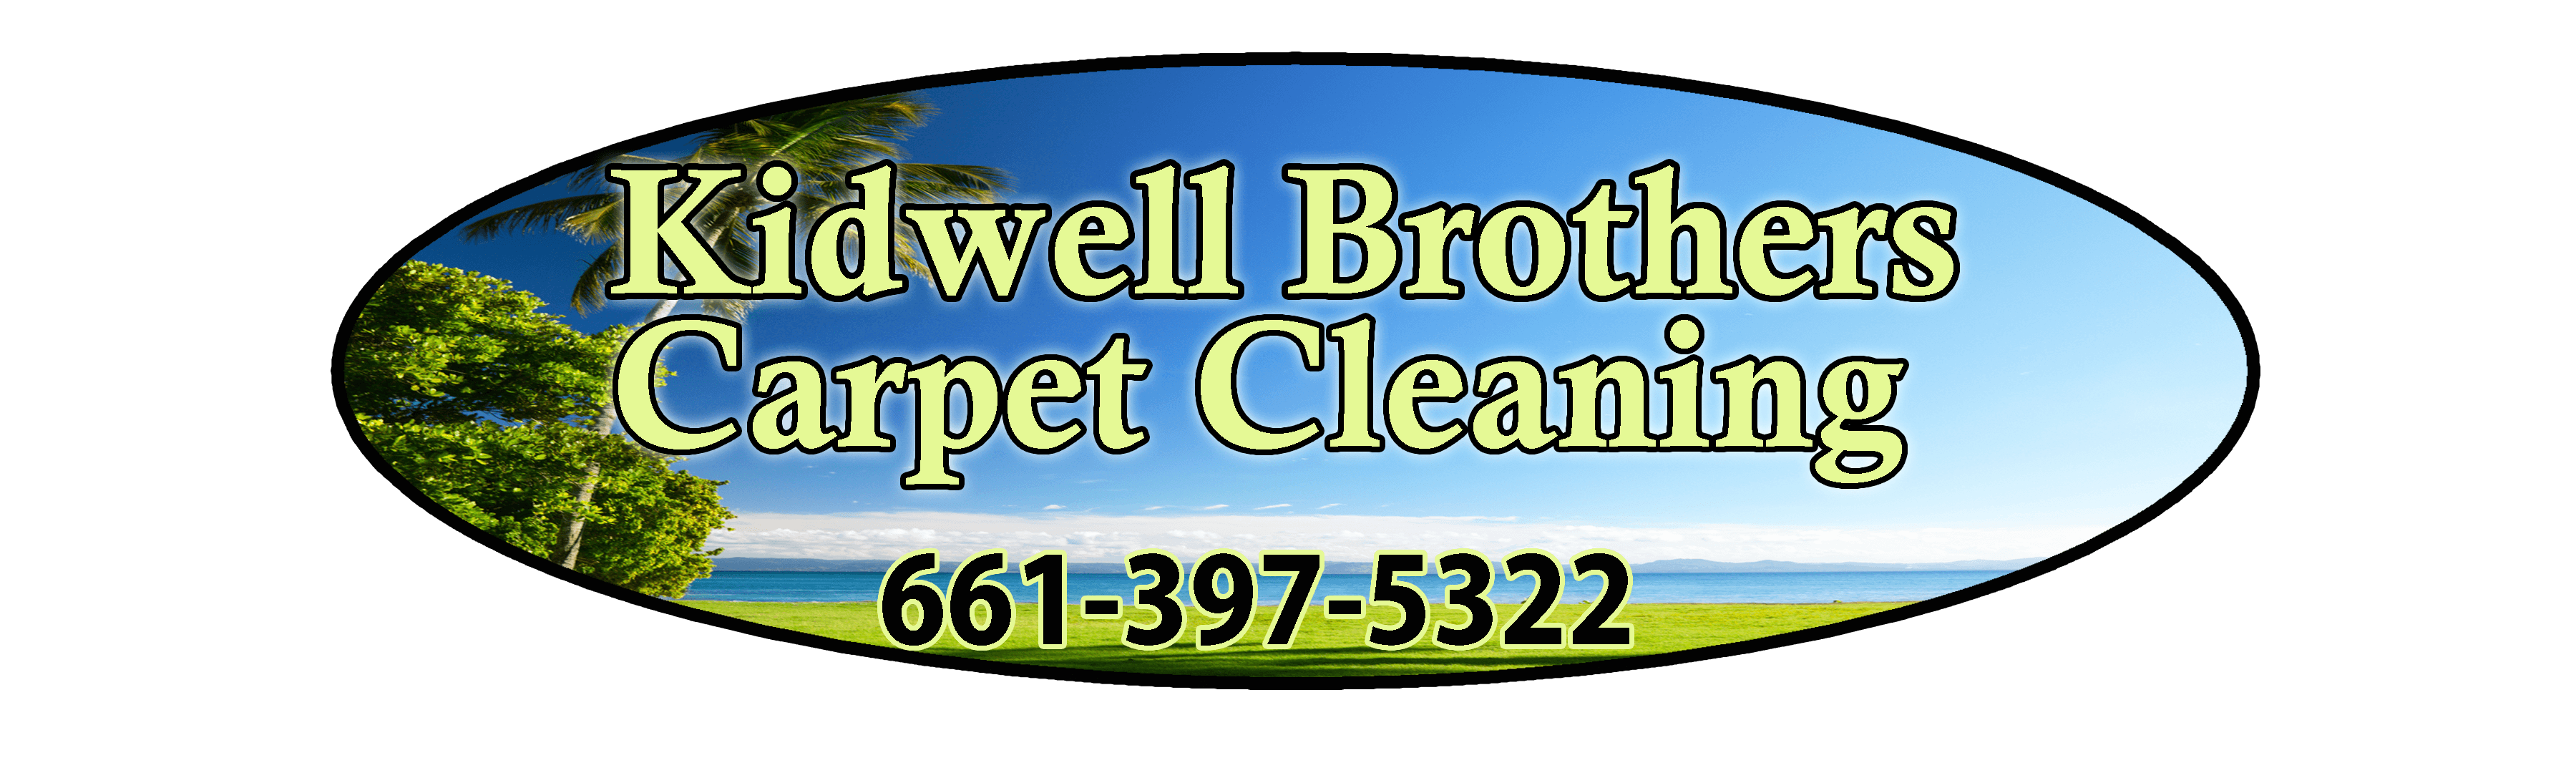 kidwell brothers carpet cleaning contact number